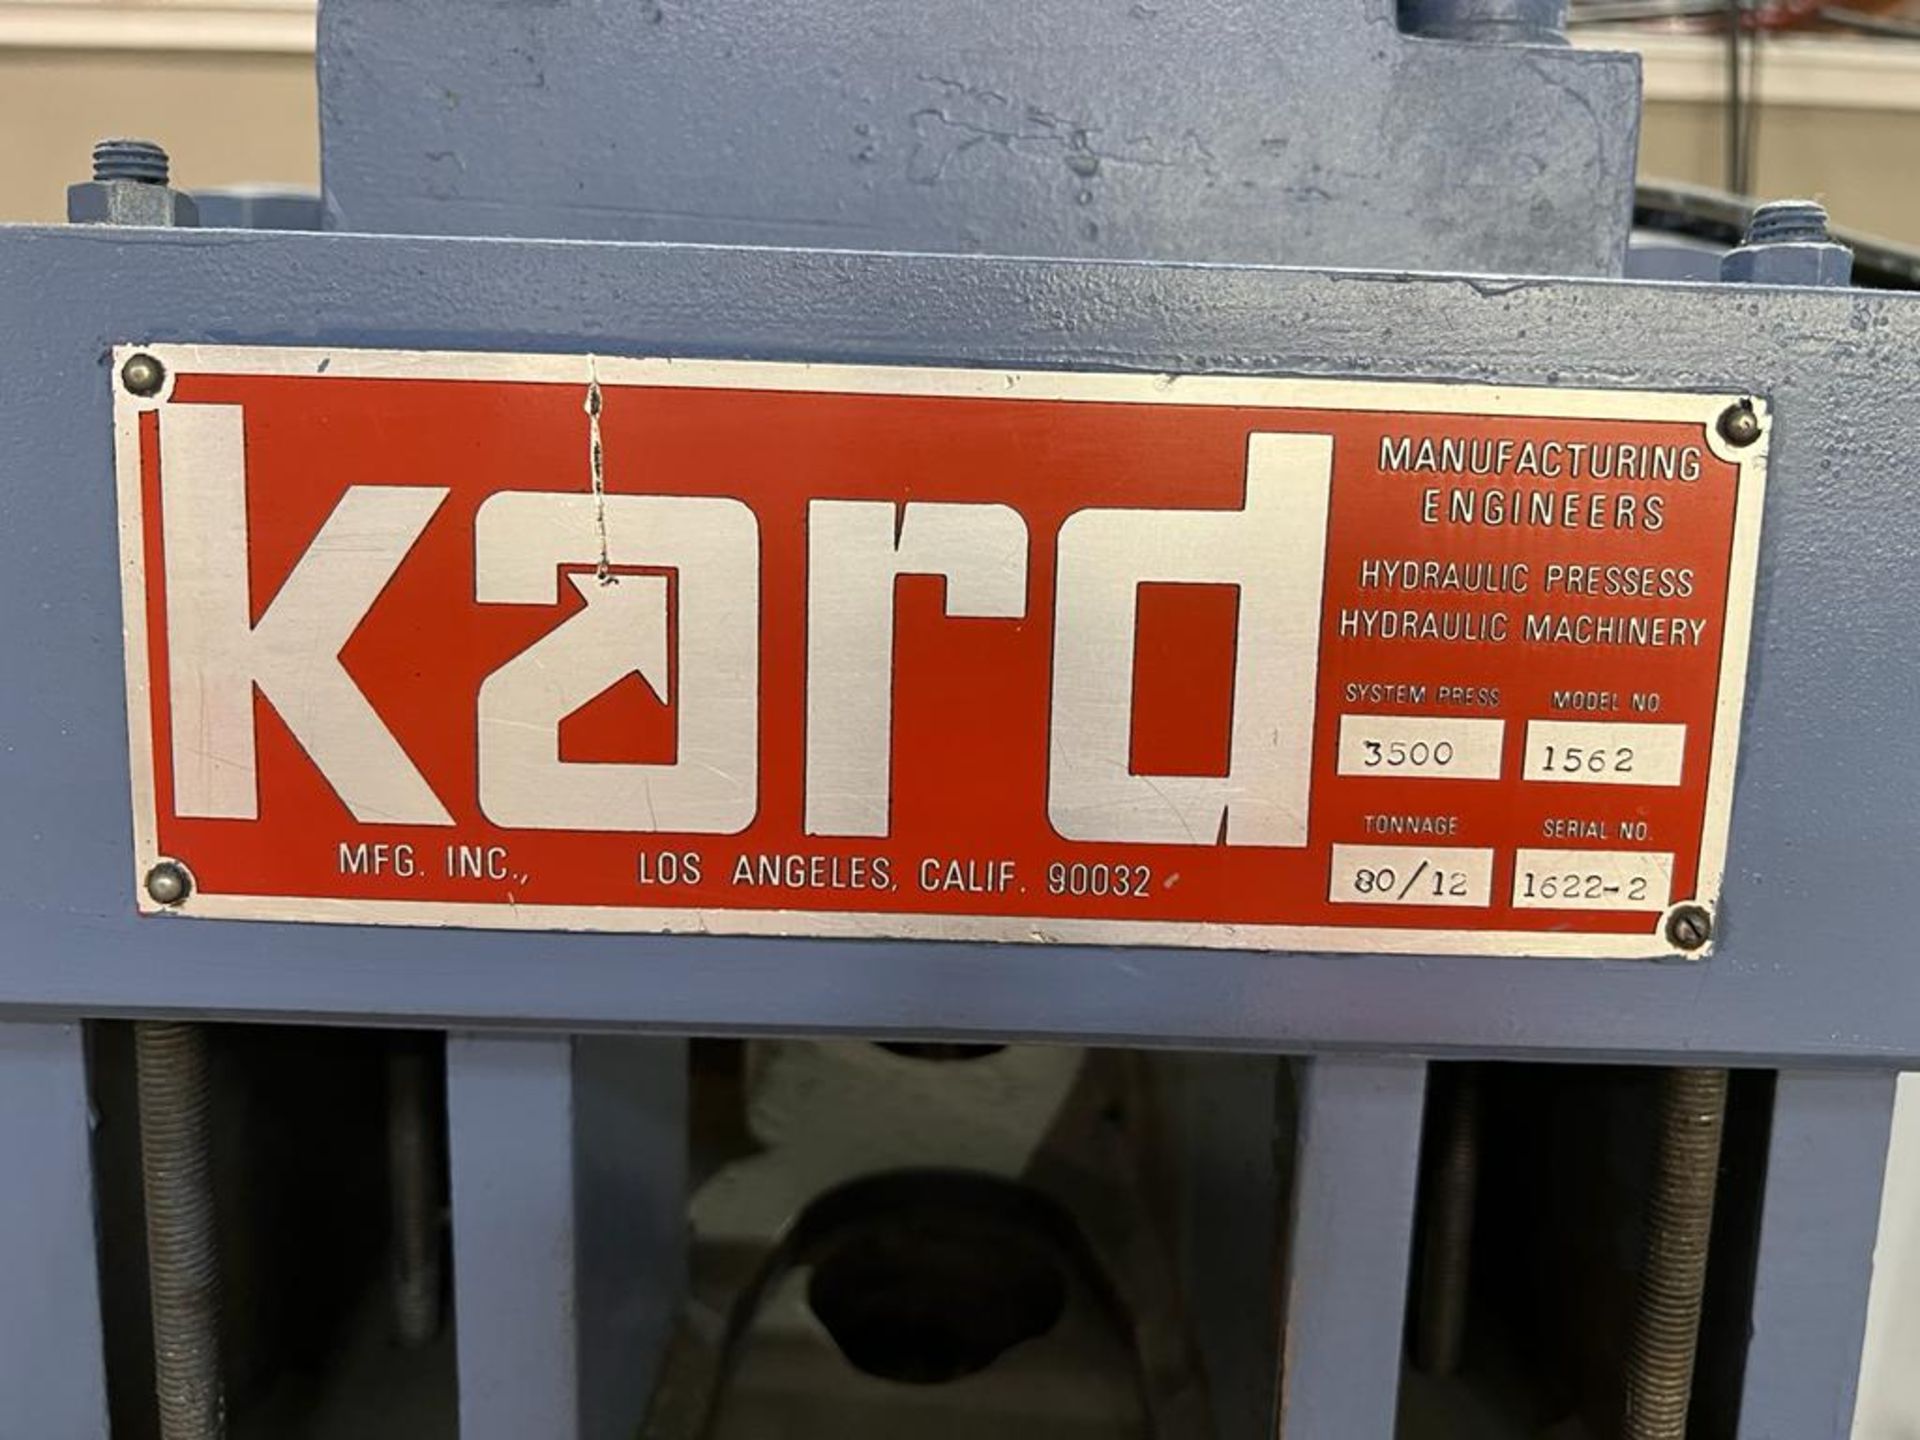 KARD MODEL 1562, 80 TON HYDRAULIC TRANSFER PRESS, SYSTEM PRESSURE 3500.(SOLD AS-IS - NO WARRANTY) - Image 5 of 5